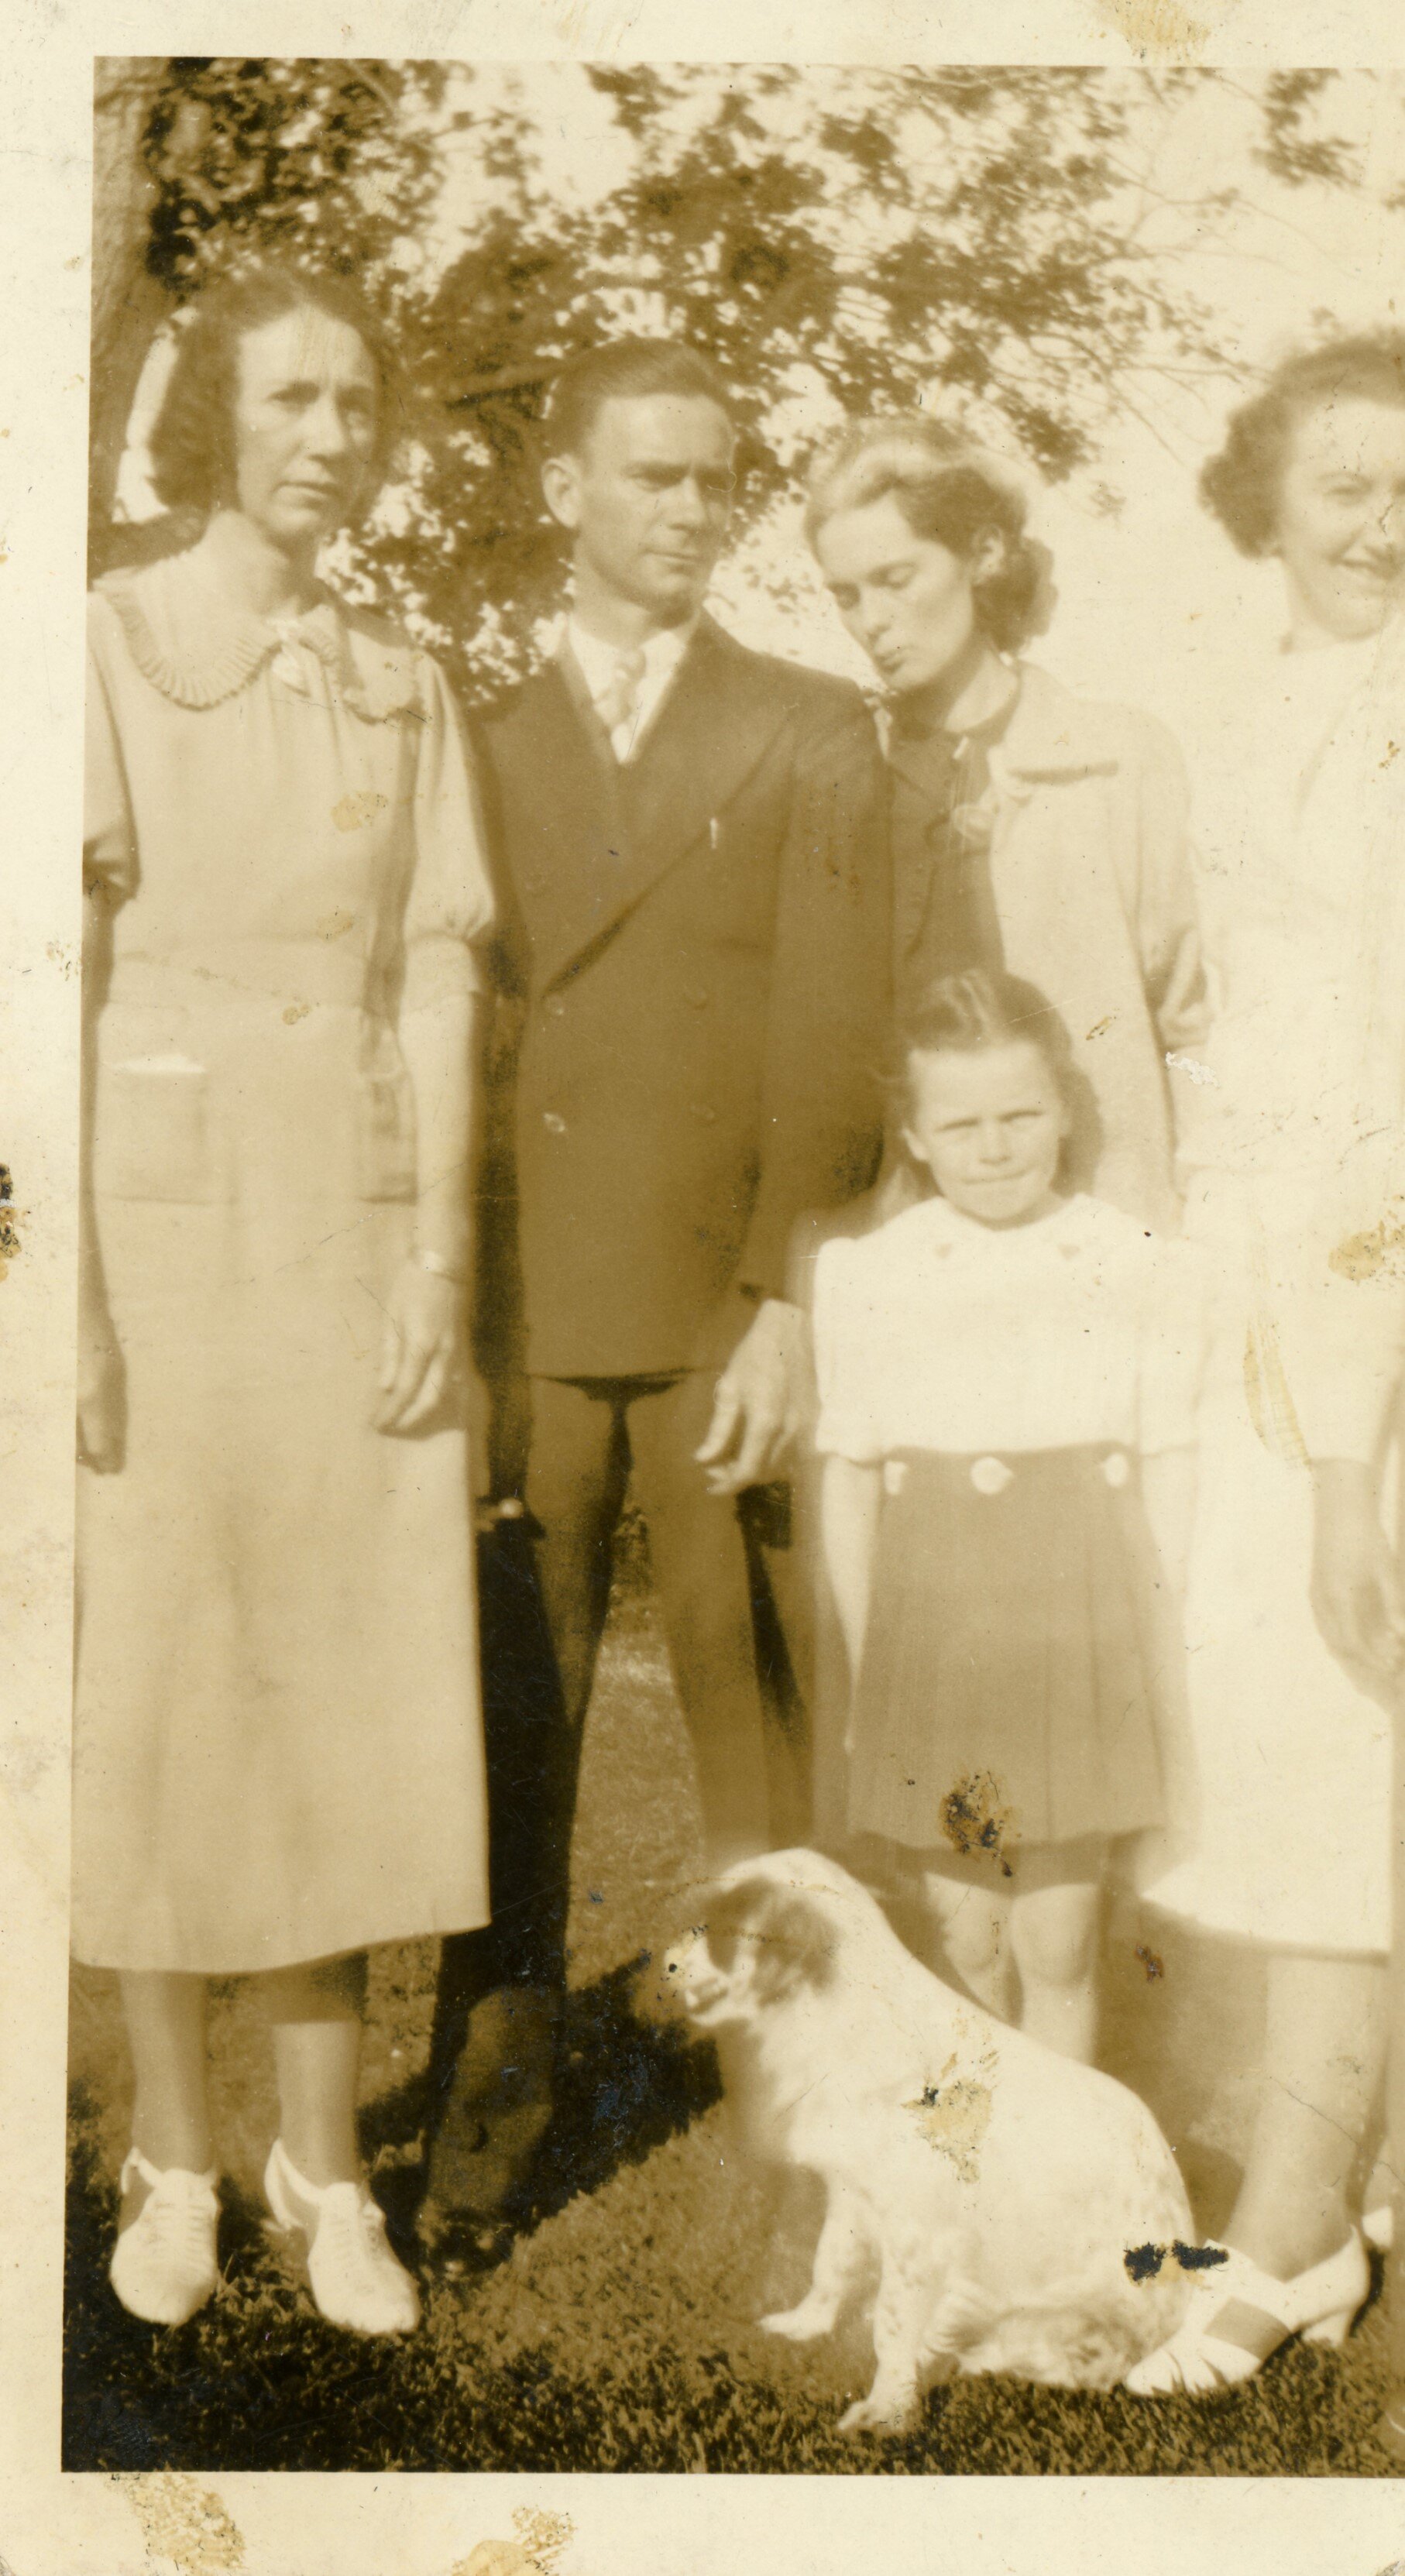 Evelyn Chadwick, Claude Chadwick and wife Mary, Virgie and young girl is Sue (Claude and Mary’s daughter)